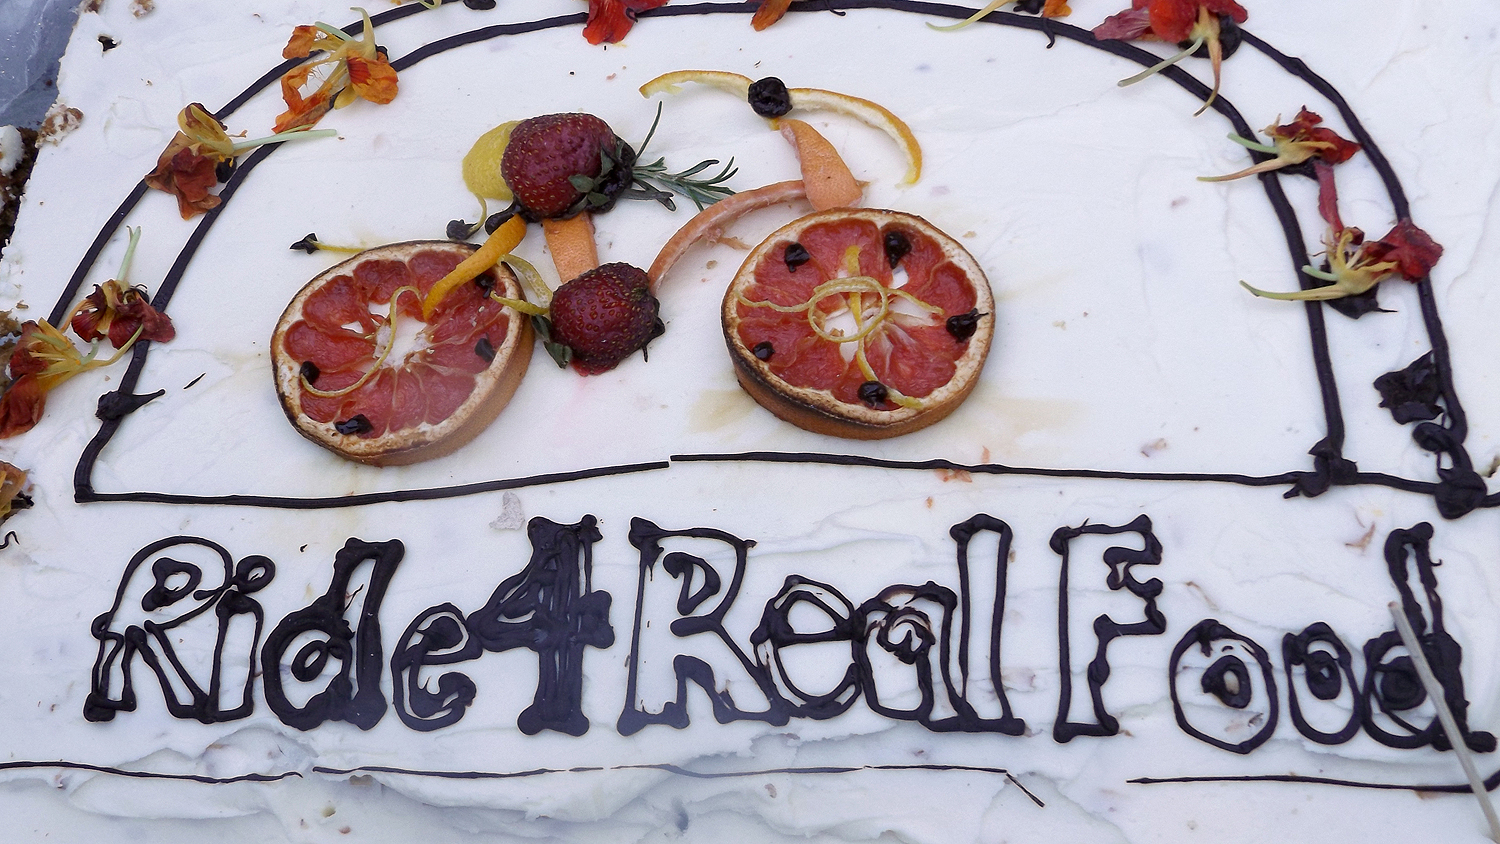 Ride4RealFood: Reporting From A Food Security Fundraiser